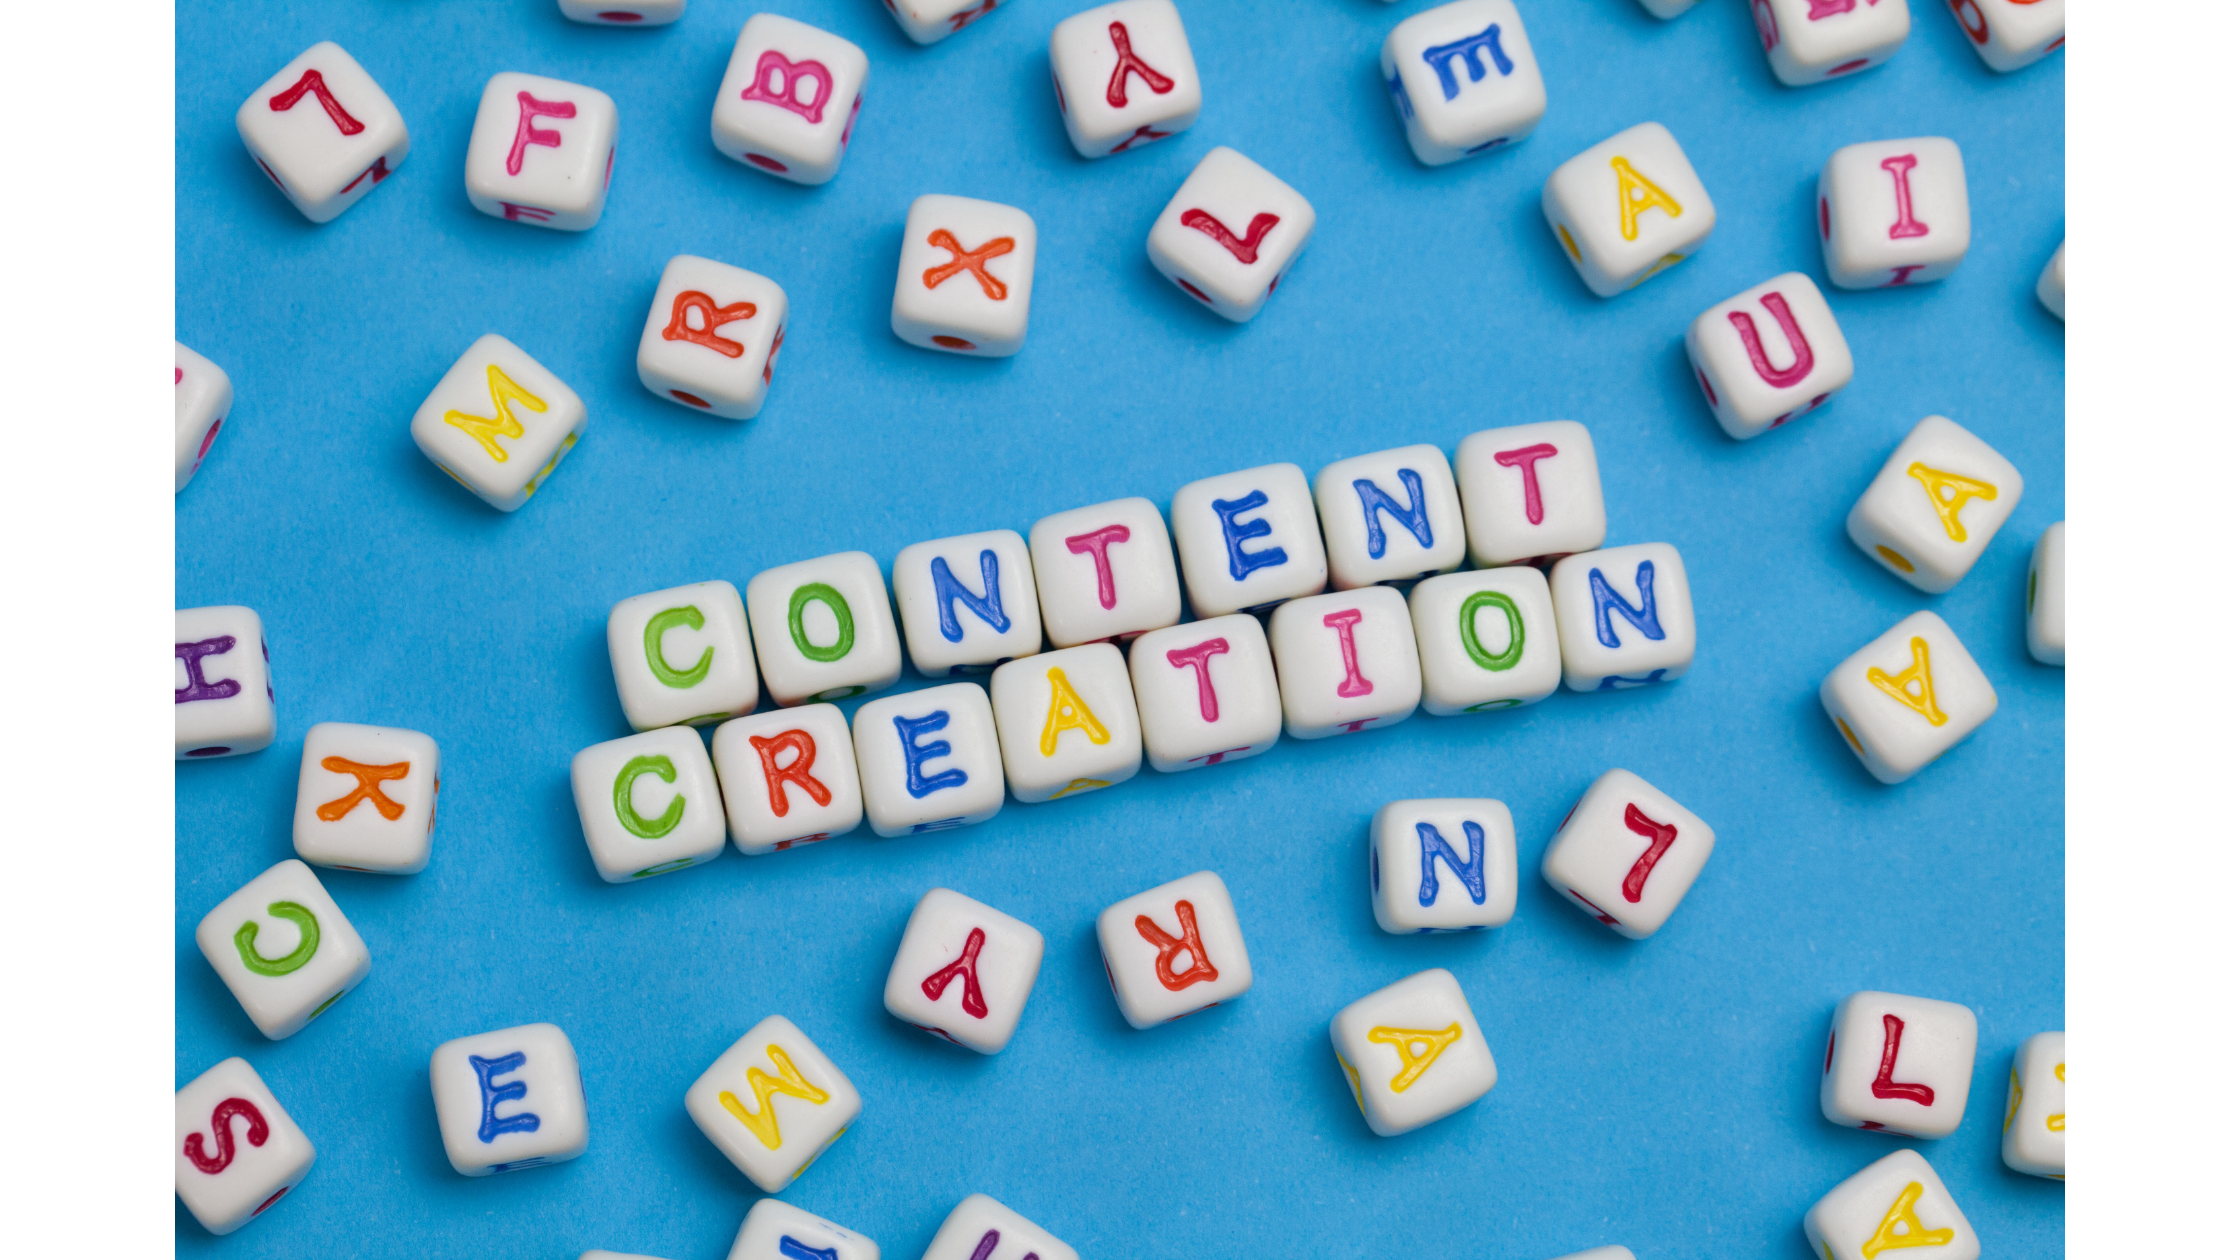 Creative Content is Key to Connecting